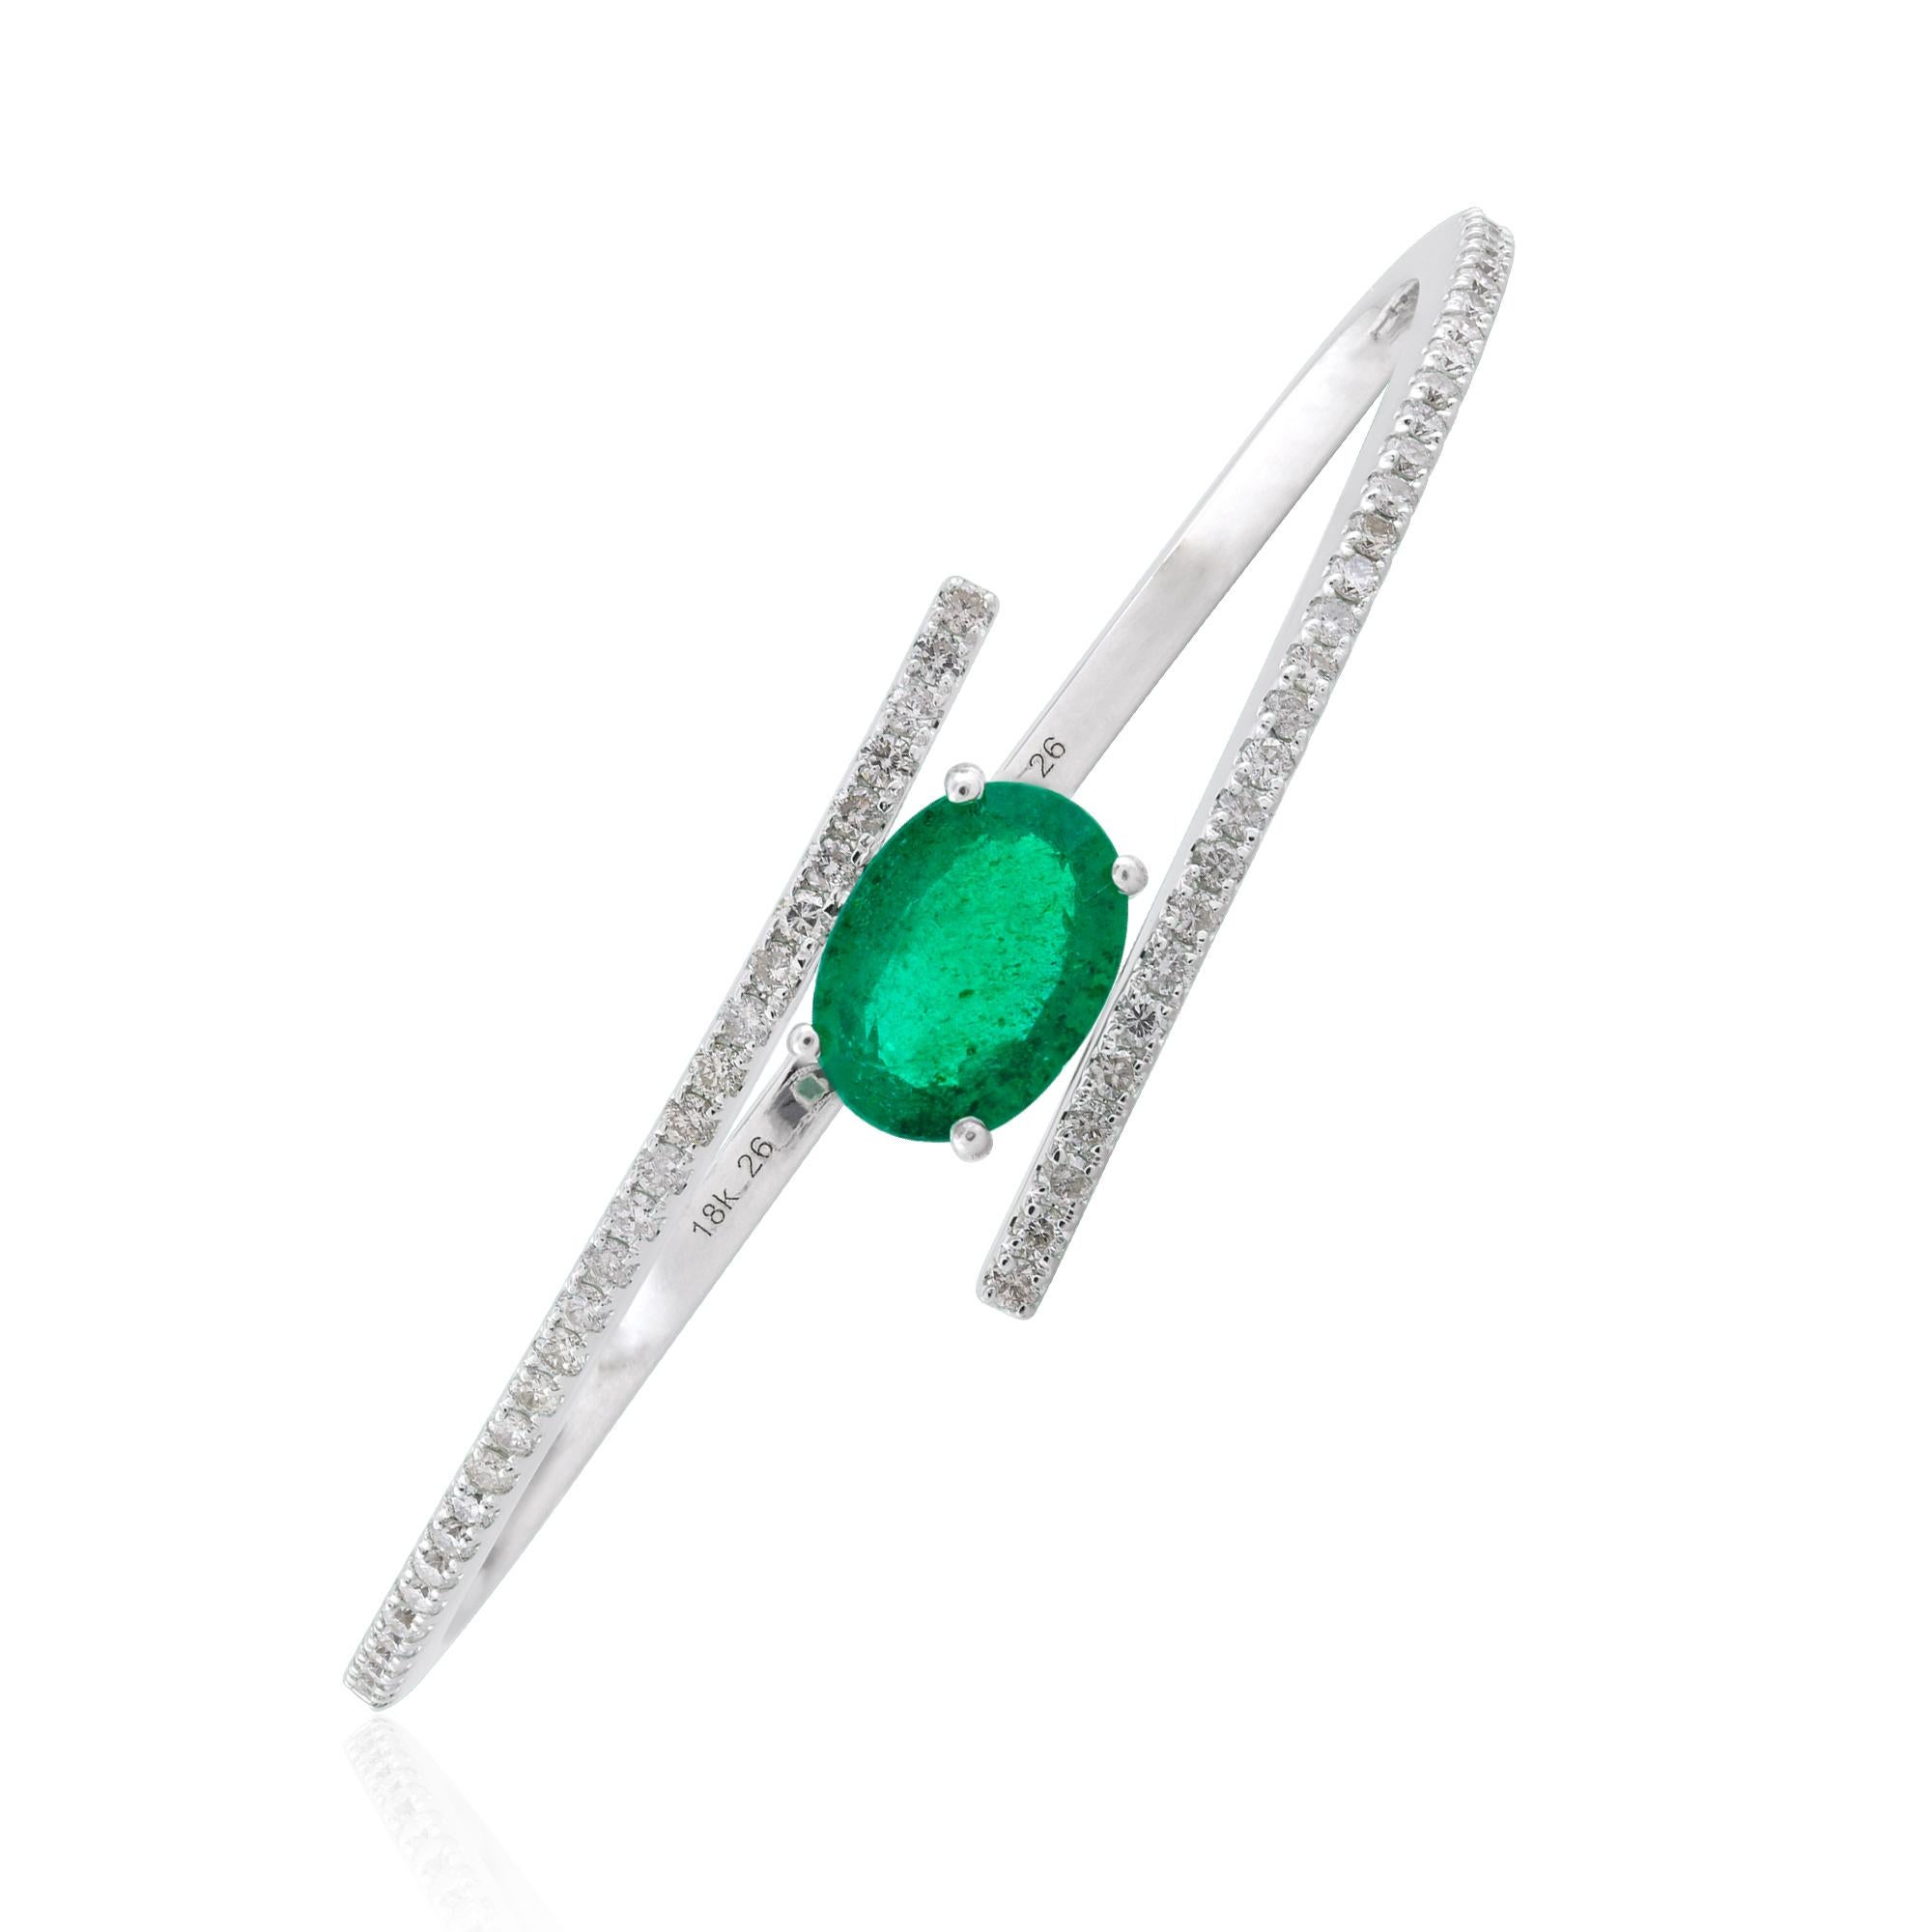 Item Code :- SEB-6308A
Gross Weight :- 13.89 gm
14k Solid White Gold Weight :- 13.14 gm
Natural Diamond Weight :- 1.00 carat  ( AVERAGE DIAMOND CLARITY SI1-SI2 & COLOR H-I )
Emerald Weight :- 2.72 carat

✦ Sizing
.....................
We can adjust